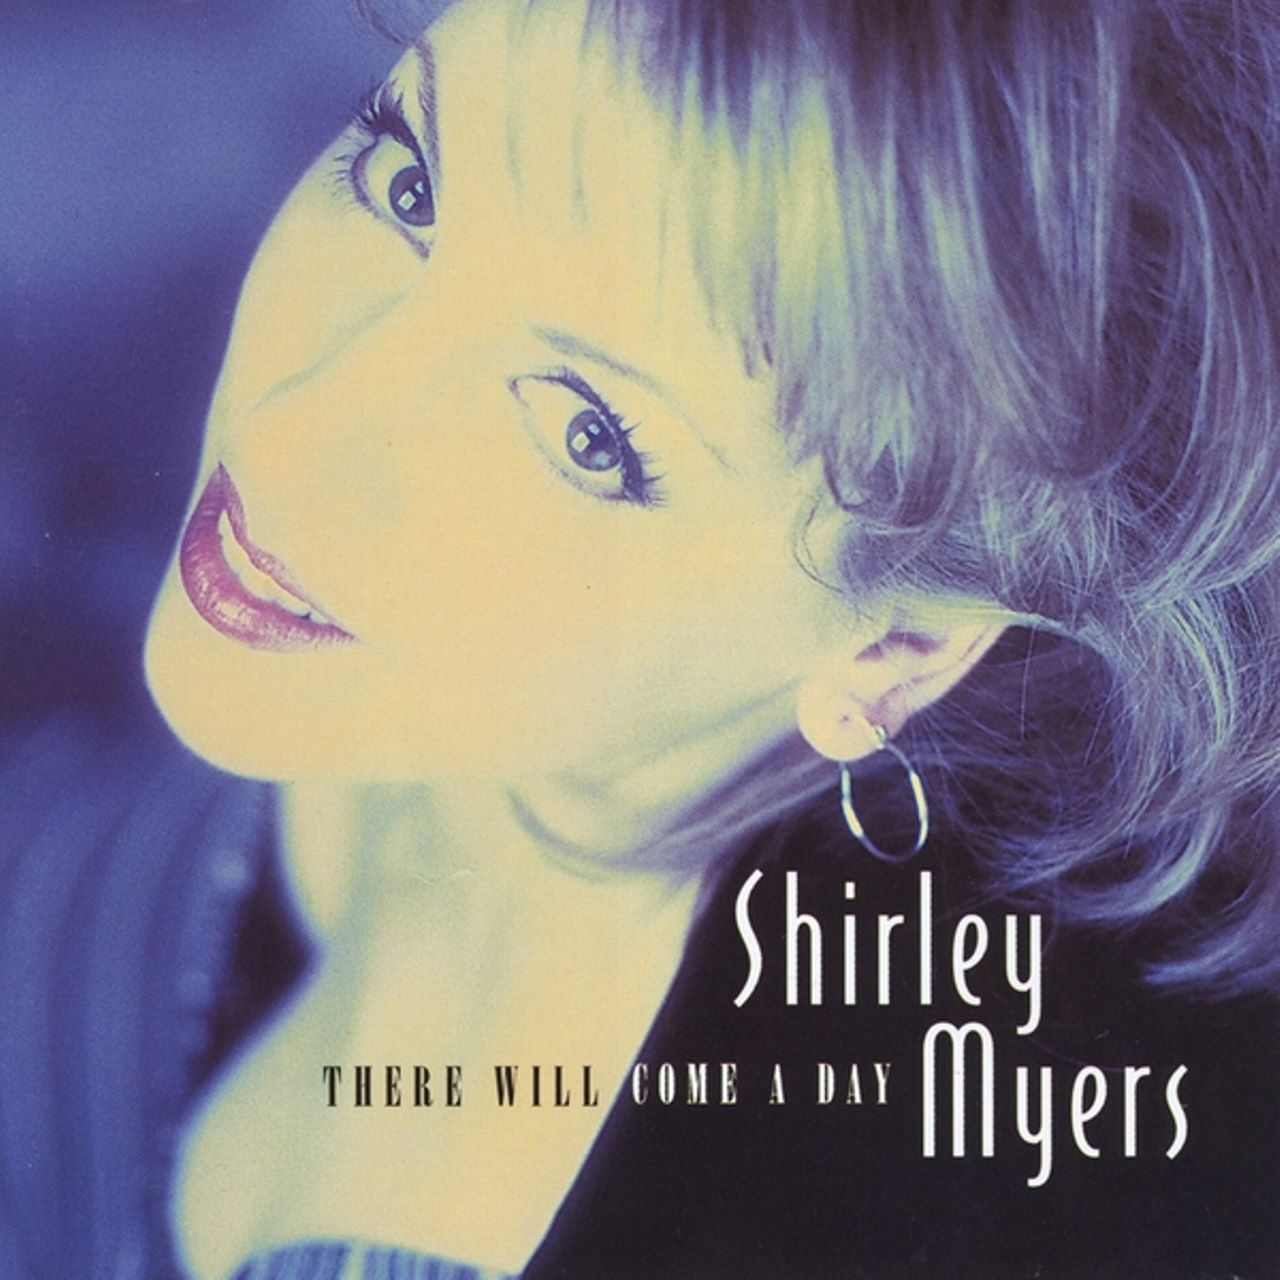 Shirley Myers - There Will Come A Day cover album